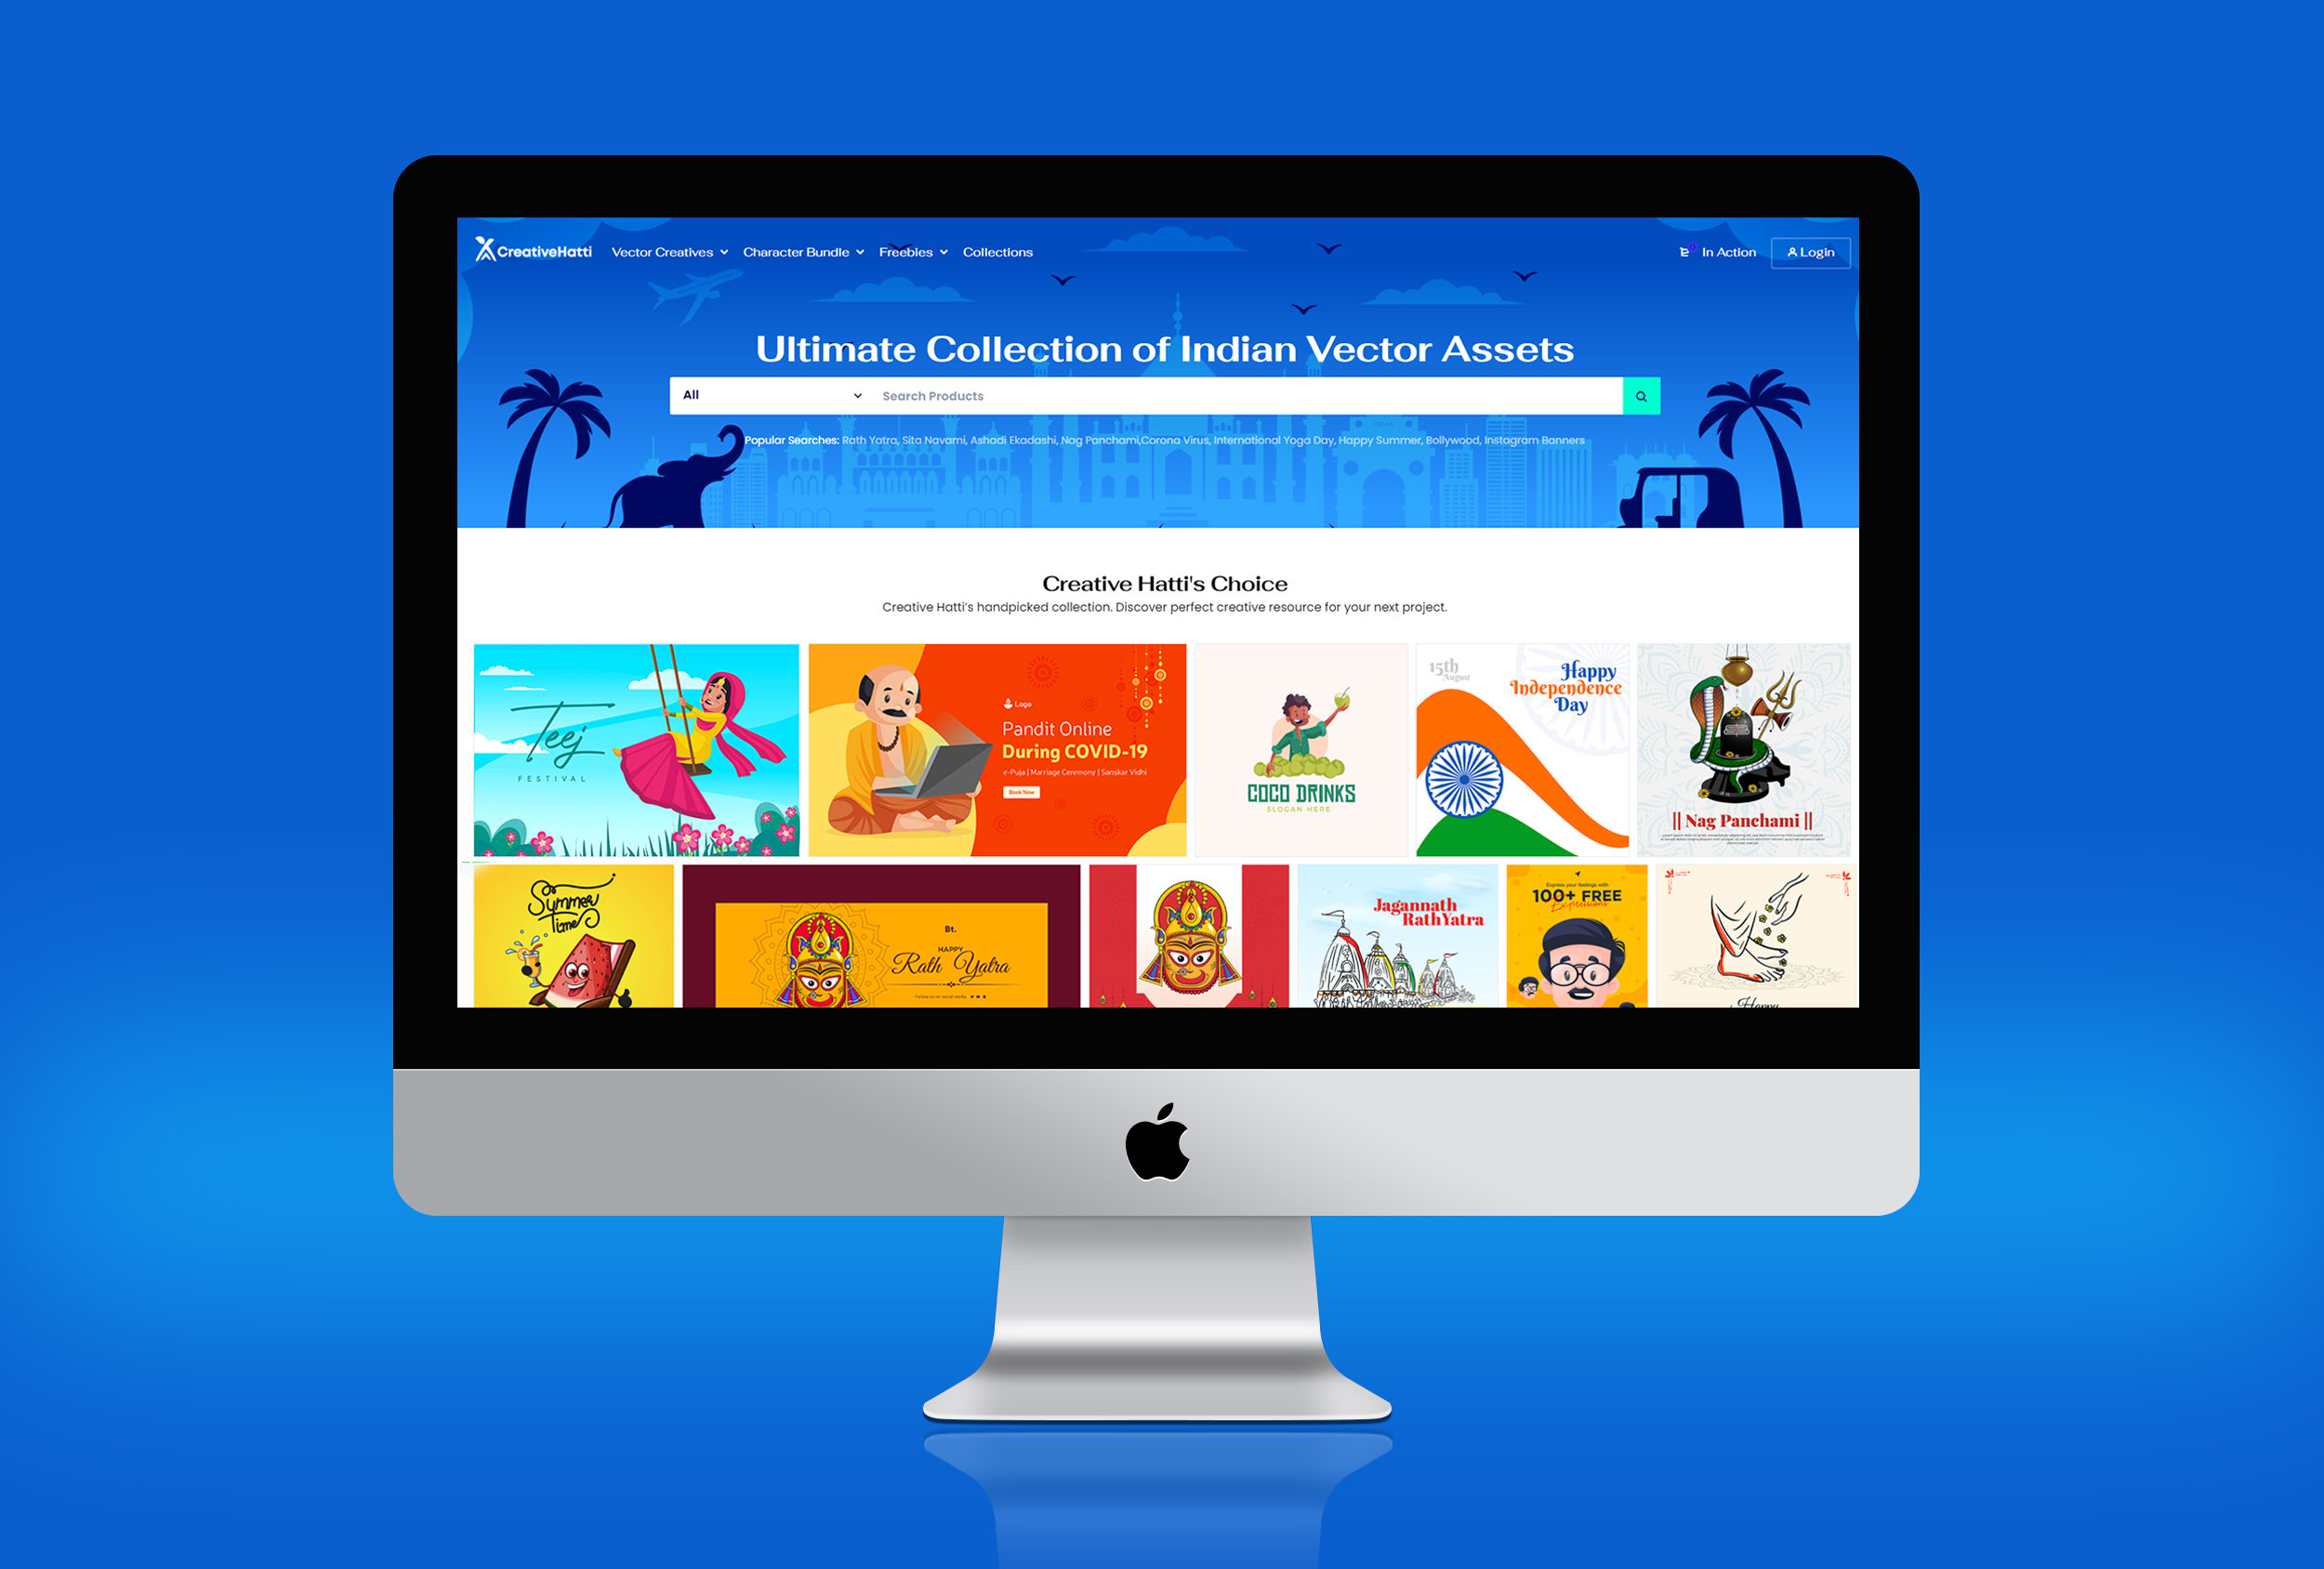 CreativeHatti, a swiftly growing hub for Indian Vectors, Graphics, and Mascot Logos encourages its users to choose desi. With a collection of thousands of vector characters based on Indian people and their culture, the goal is to have the businesses in India and worldwide resonate with their Indian audience.